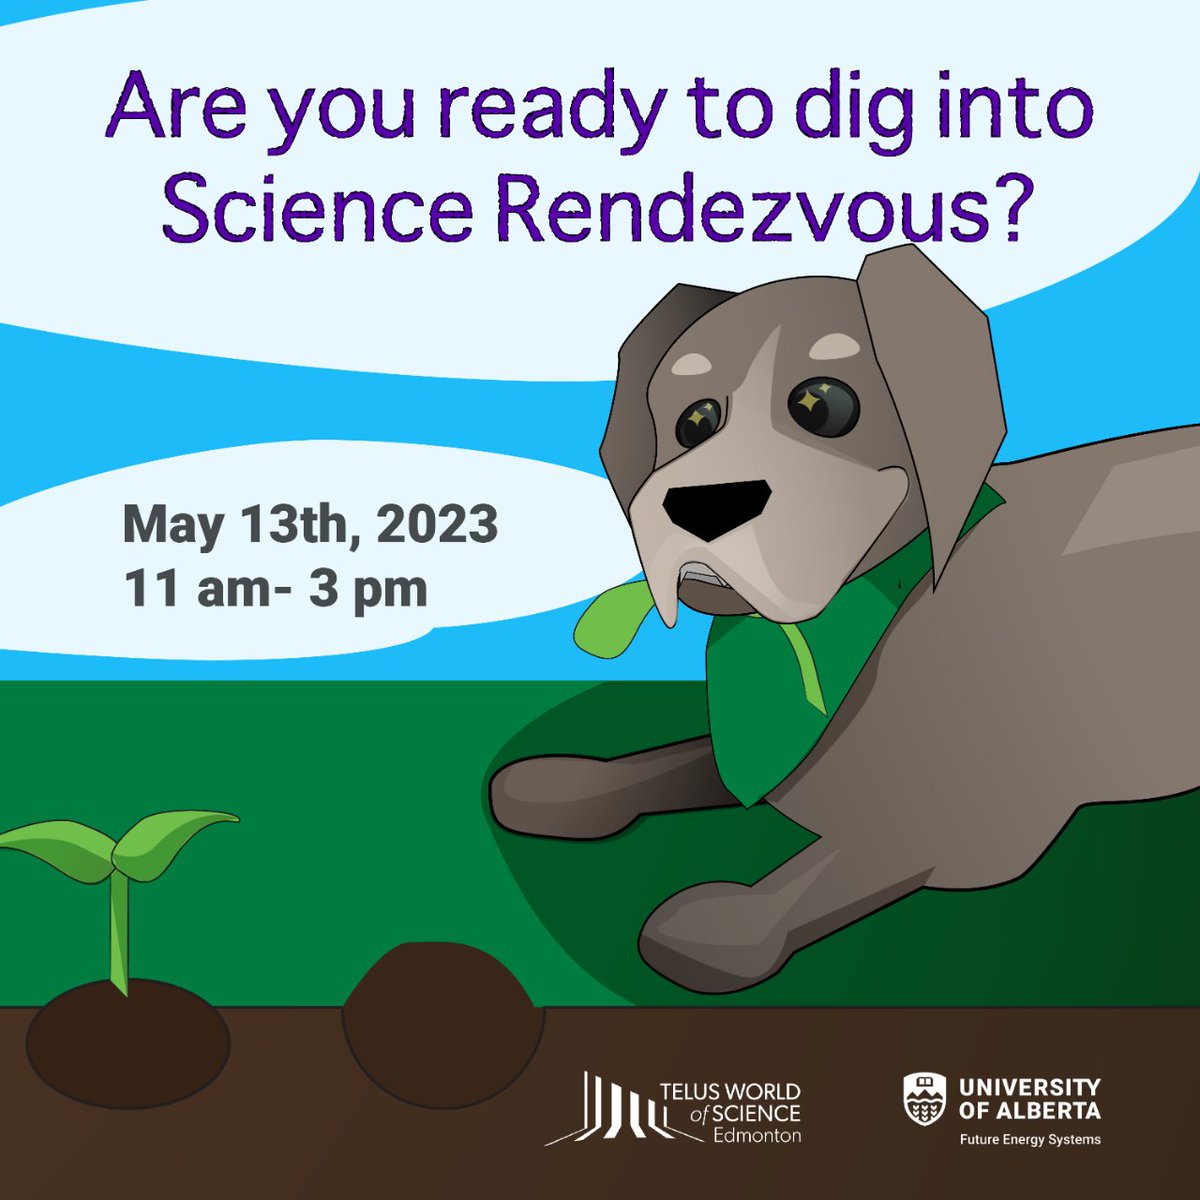 Let's dig into energy and the environment with @sci_rendezvous!! Join experts and students on May 13 at @TWoSEdm and get hands-on with activities, crafts, & more! bit.ly/38EfBlP @NatureAlberta @YEG_Science @ggcyeg @MillTreeProject @albertaemerald @ACEE_Socials